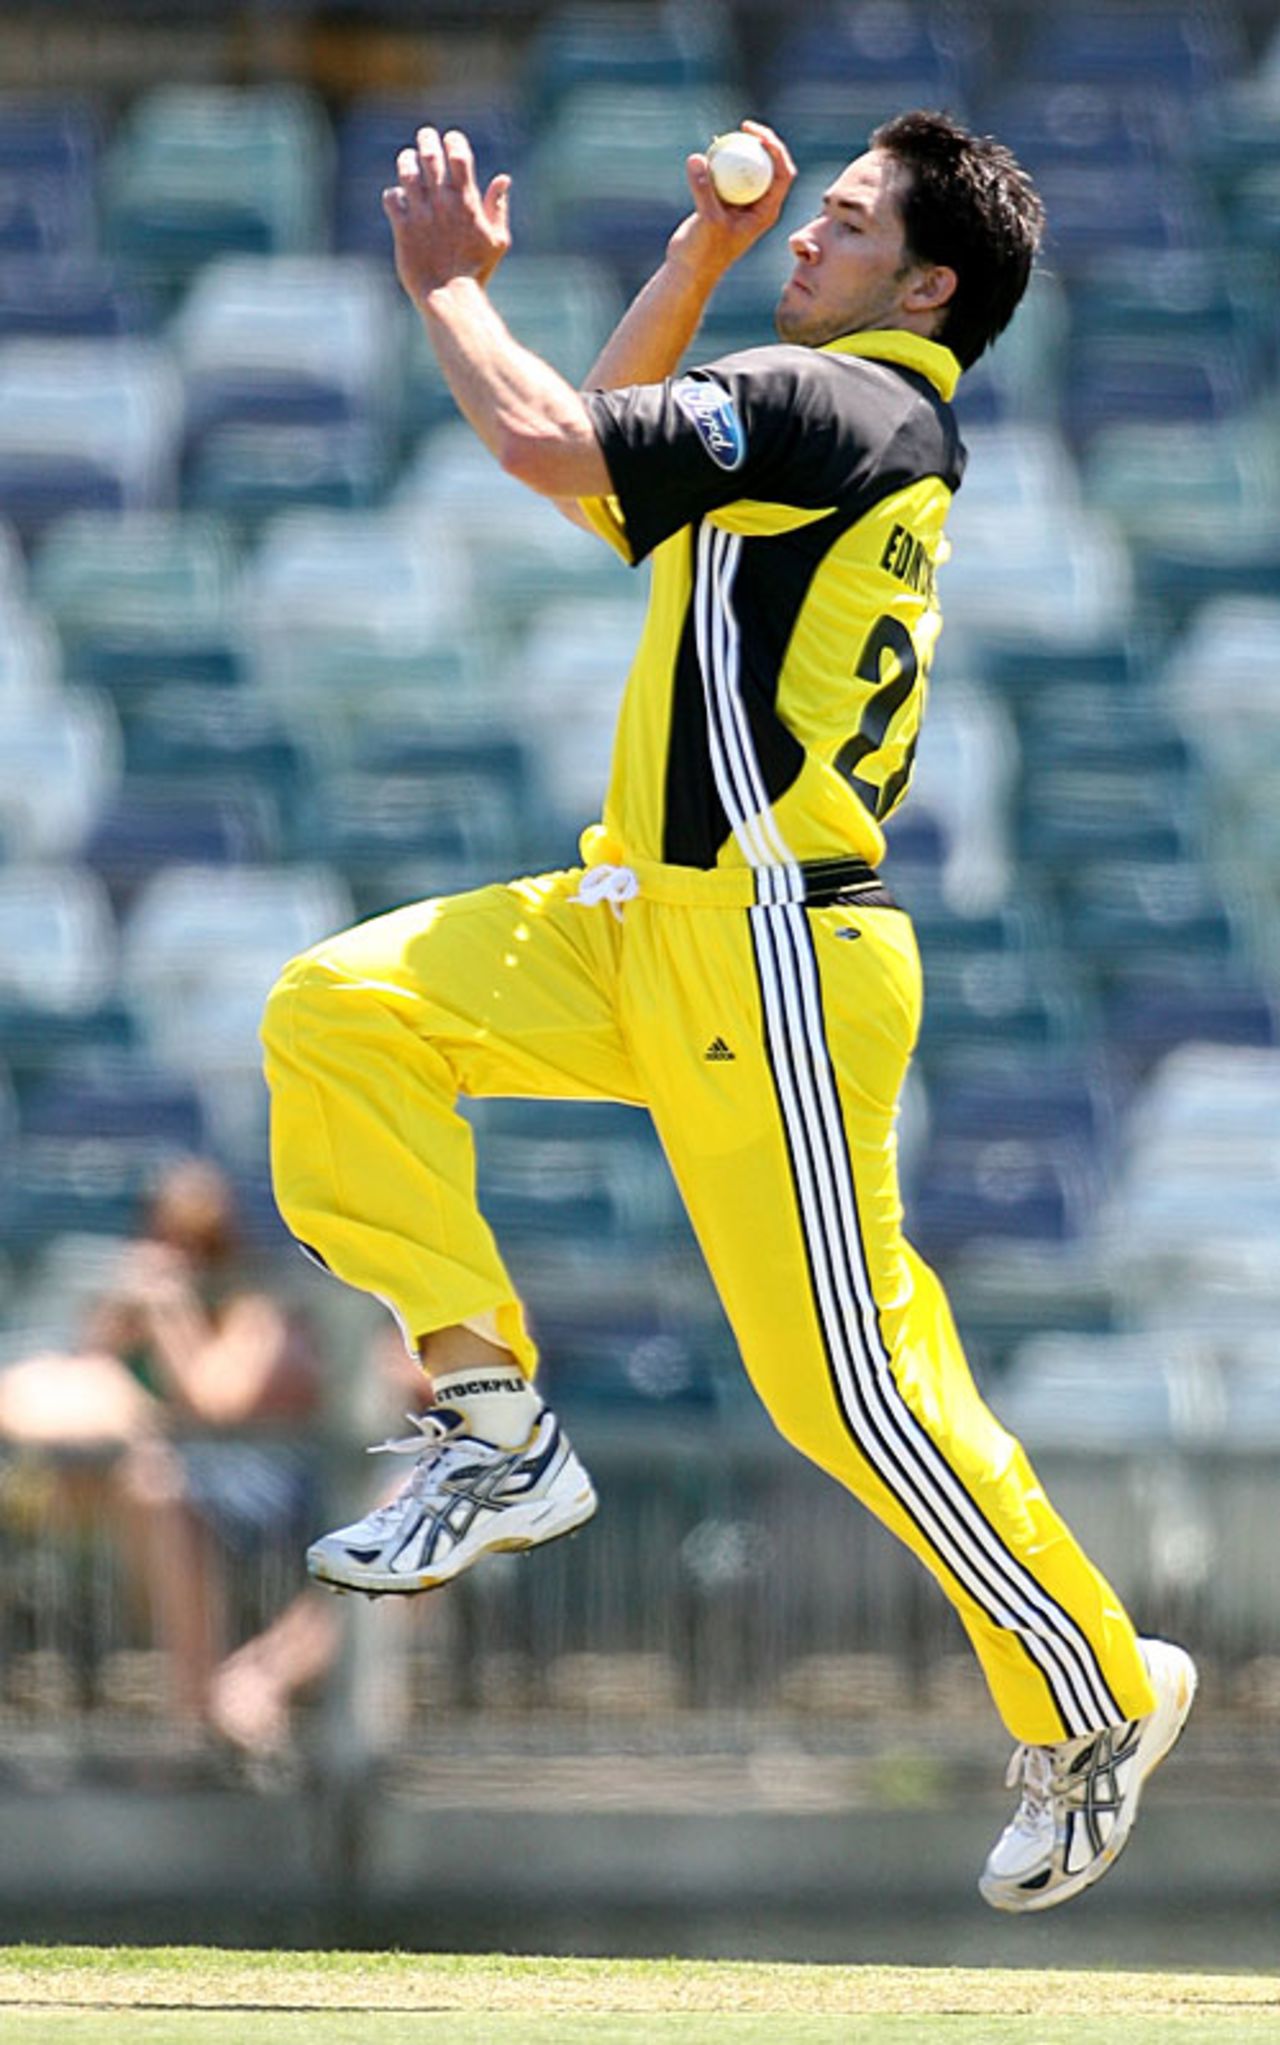 Ben Edmondson bowls against New South Wales, Western Australia v New South Wales, FR Cup, Perth, October 8, 2008